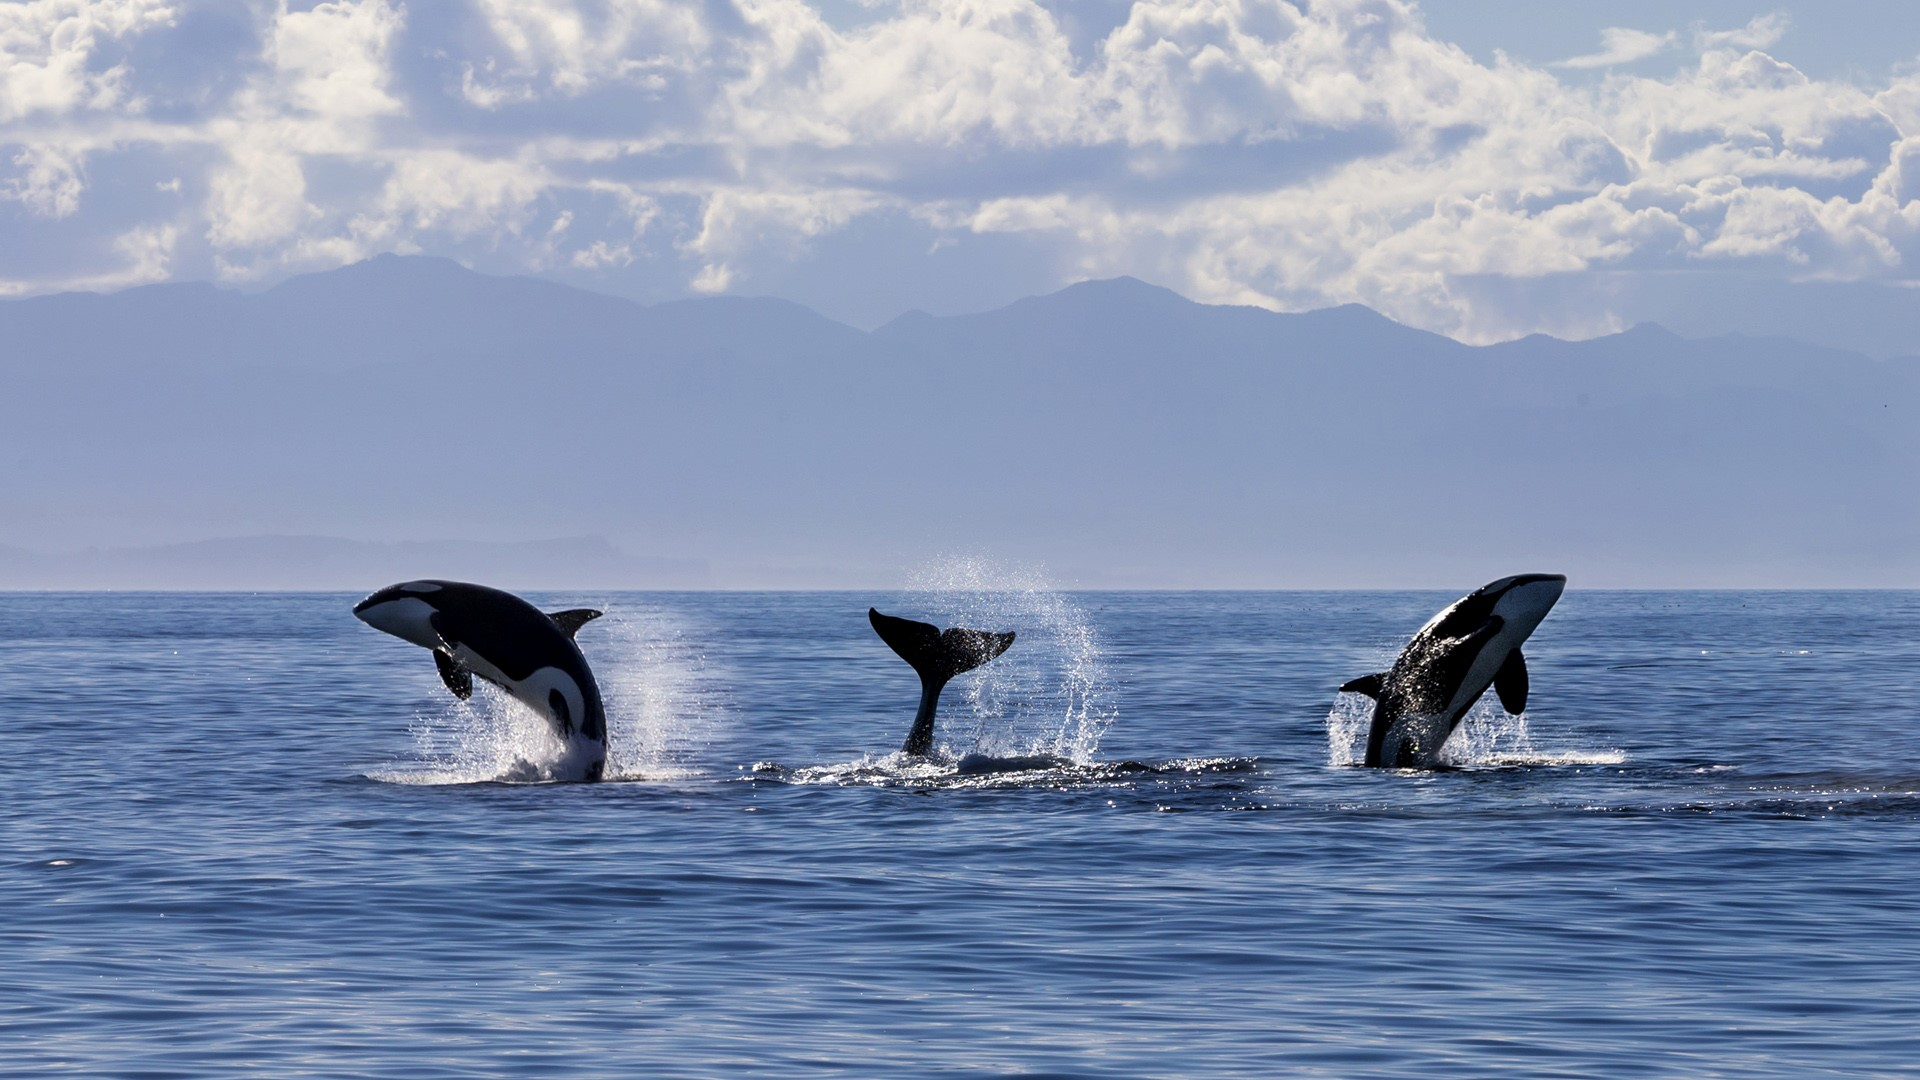 1920x1080 Killer whale (orca) family playing, Canada | Windows 10 Spotlight Images